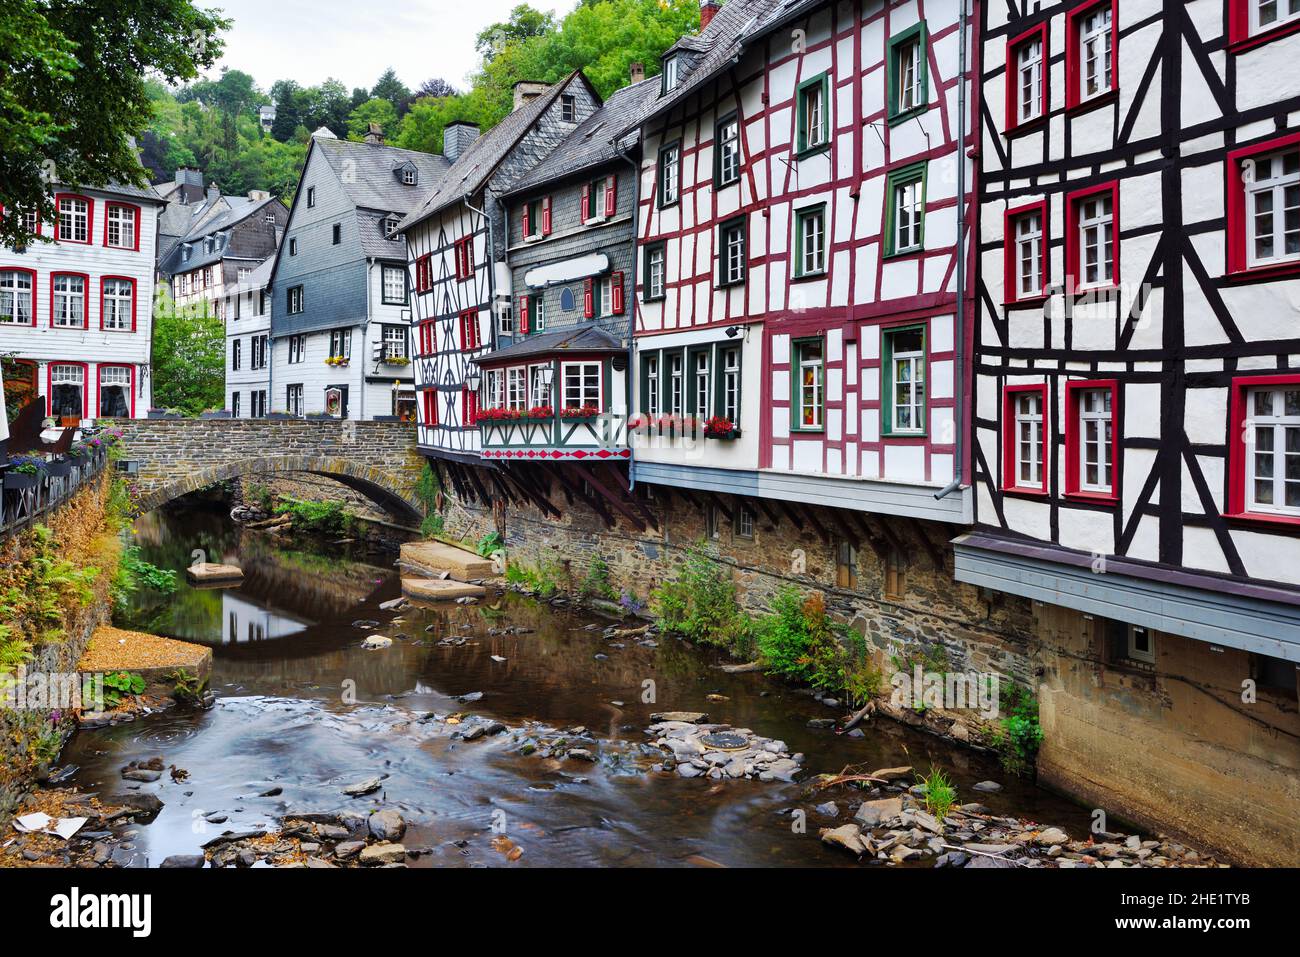 Historical Monschau Old town,  famous for its traditional half-timbered houses, Eifel region, Germany Stock Photo